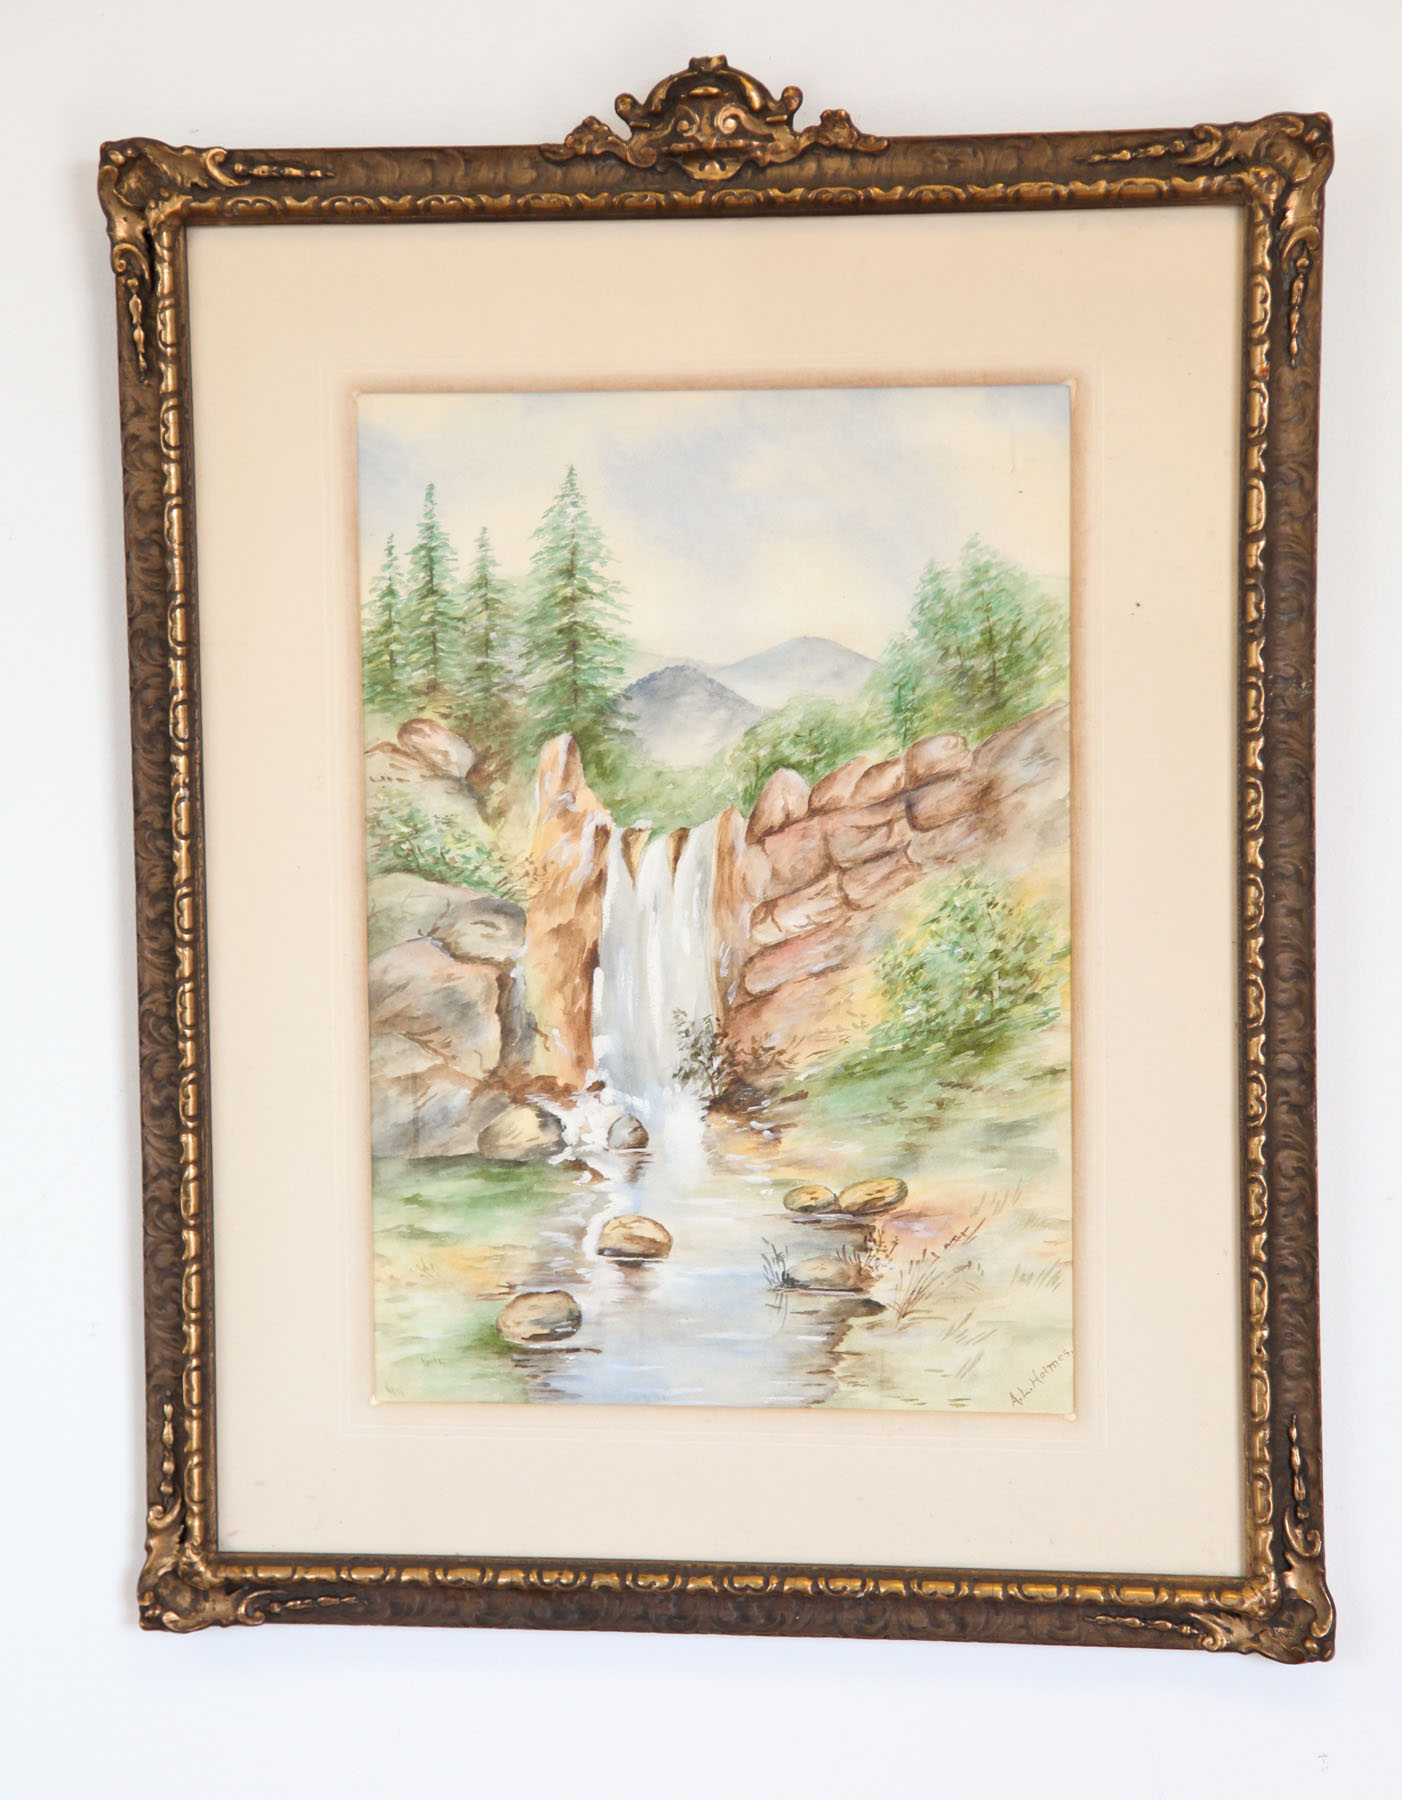 WATERFALL LANDSCAPE PAINTING (AMERICAN